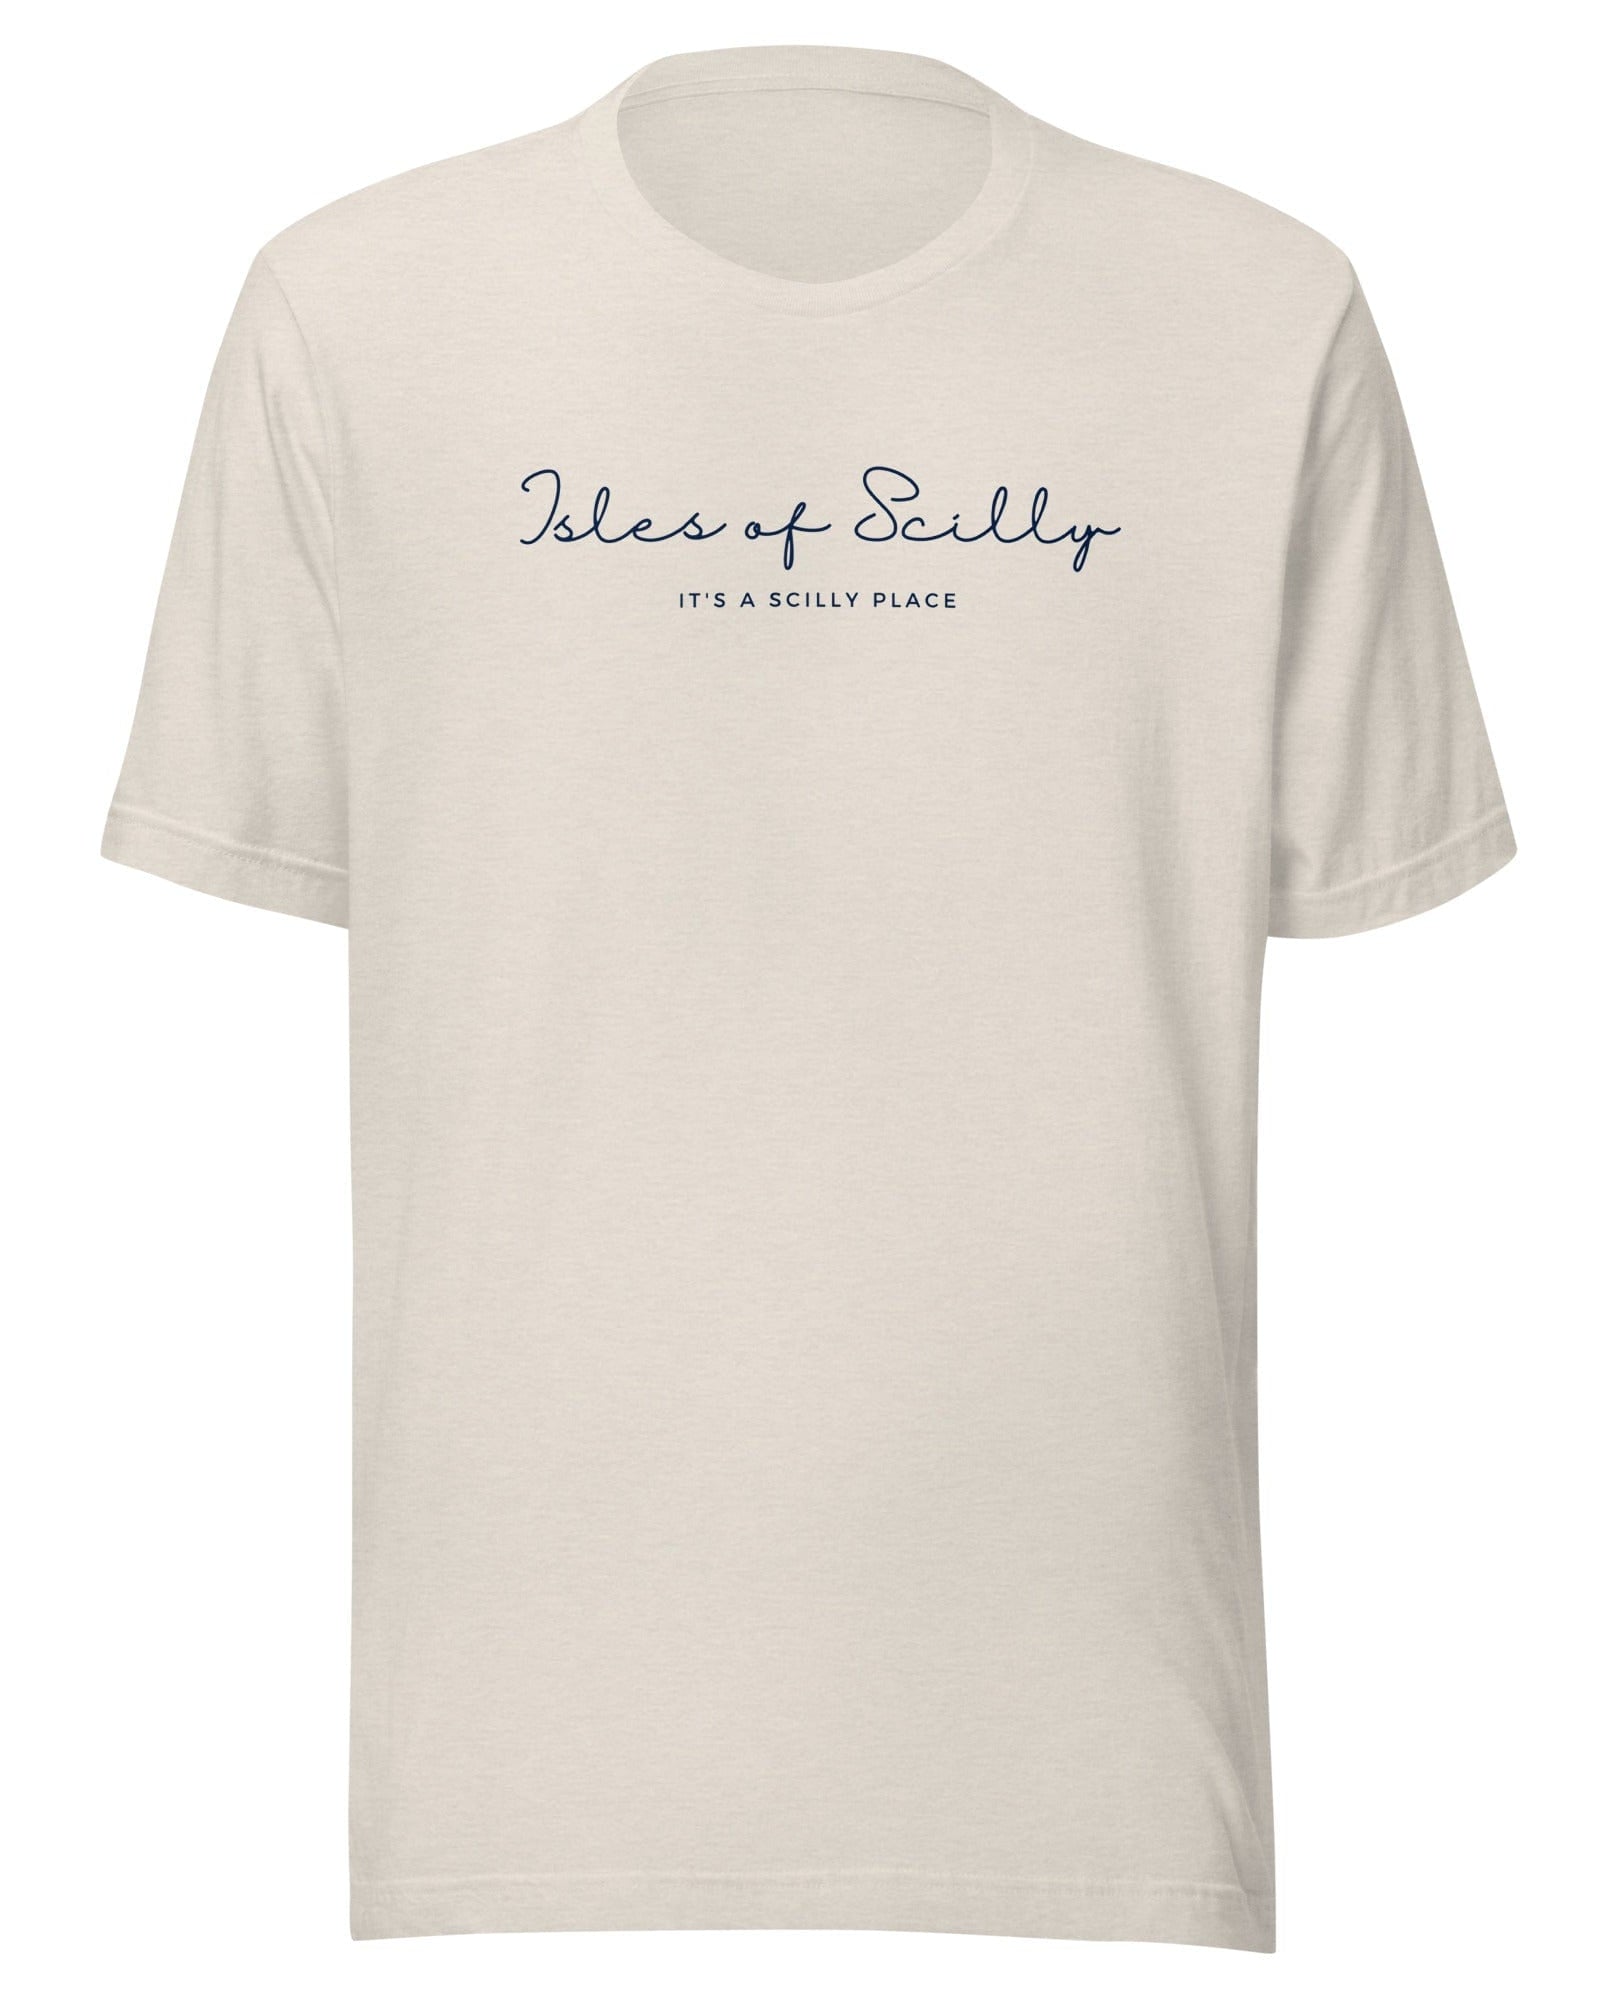 Isles of Scilly, It's a Scilly Place T-shirt Heather Dust / S Shirts & Tops Jolly & Goode